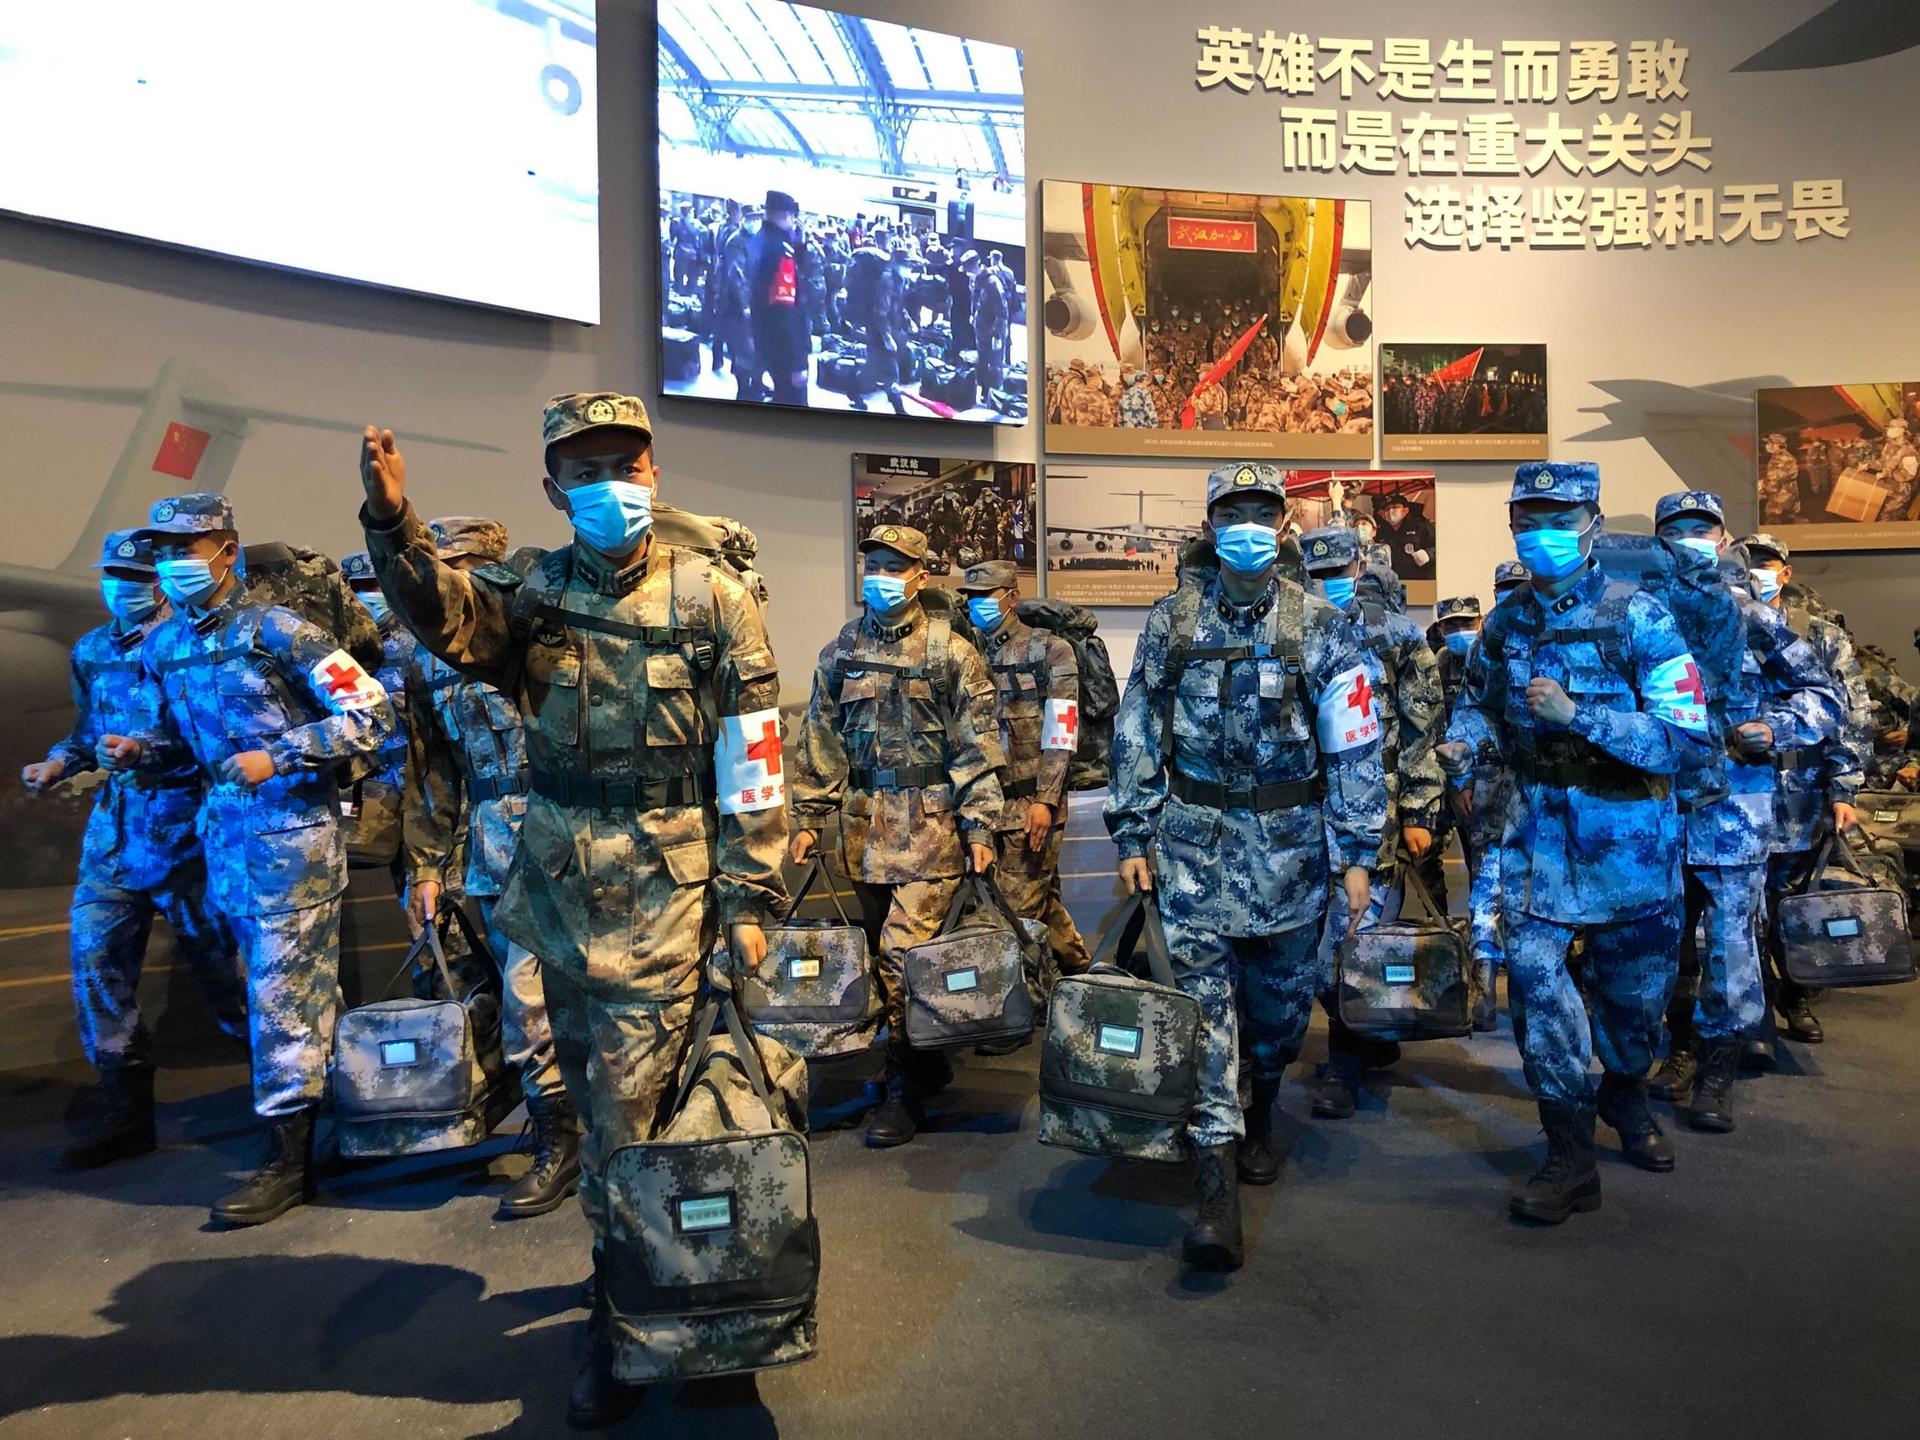 The COVID-19 Exhibition in Wuhan, China, pays tribute to soldiers. 